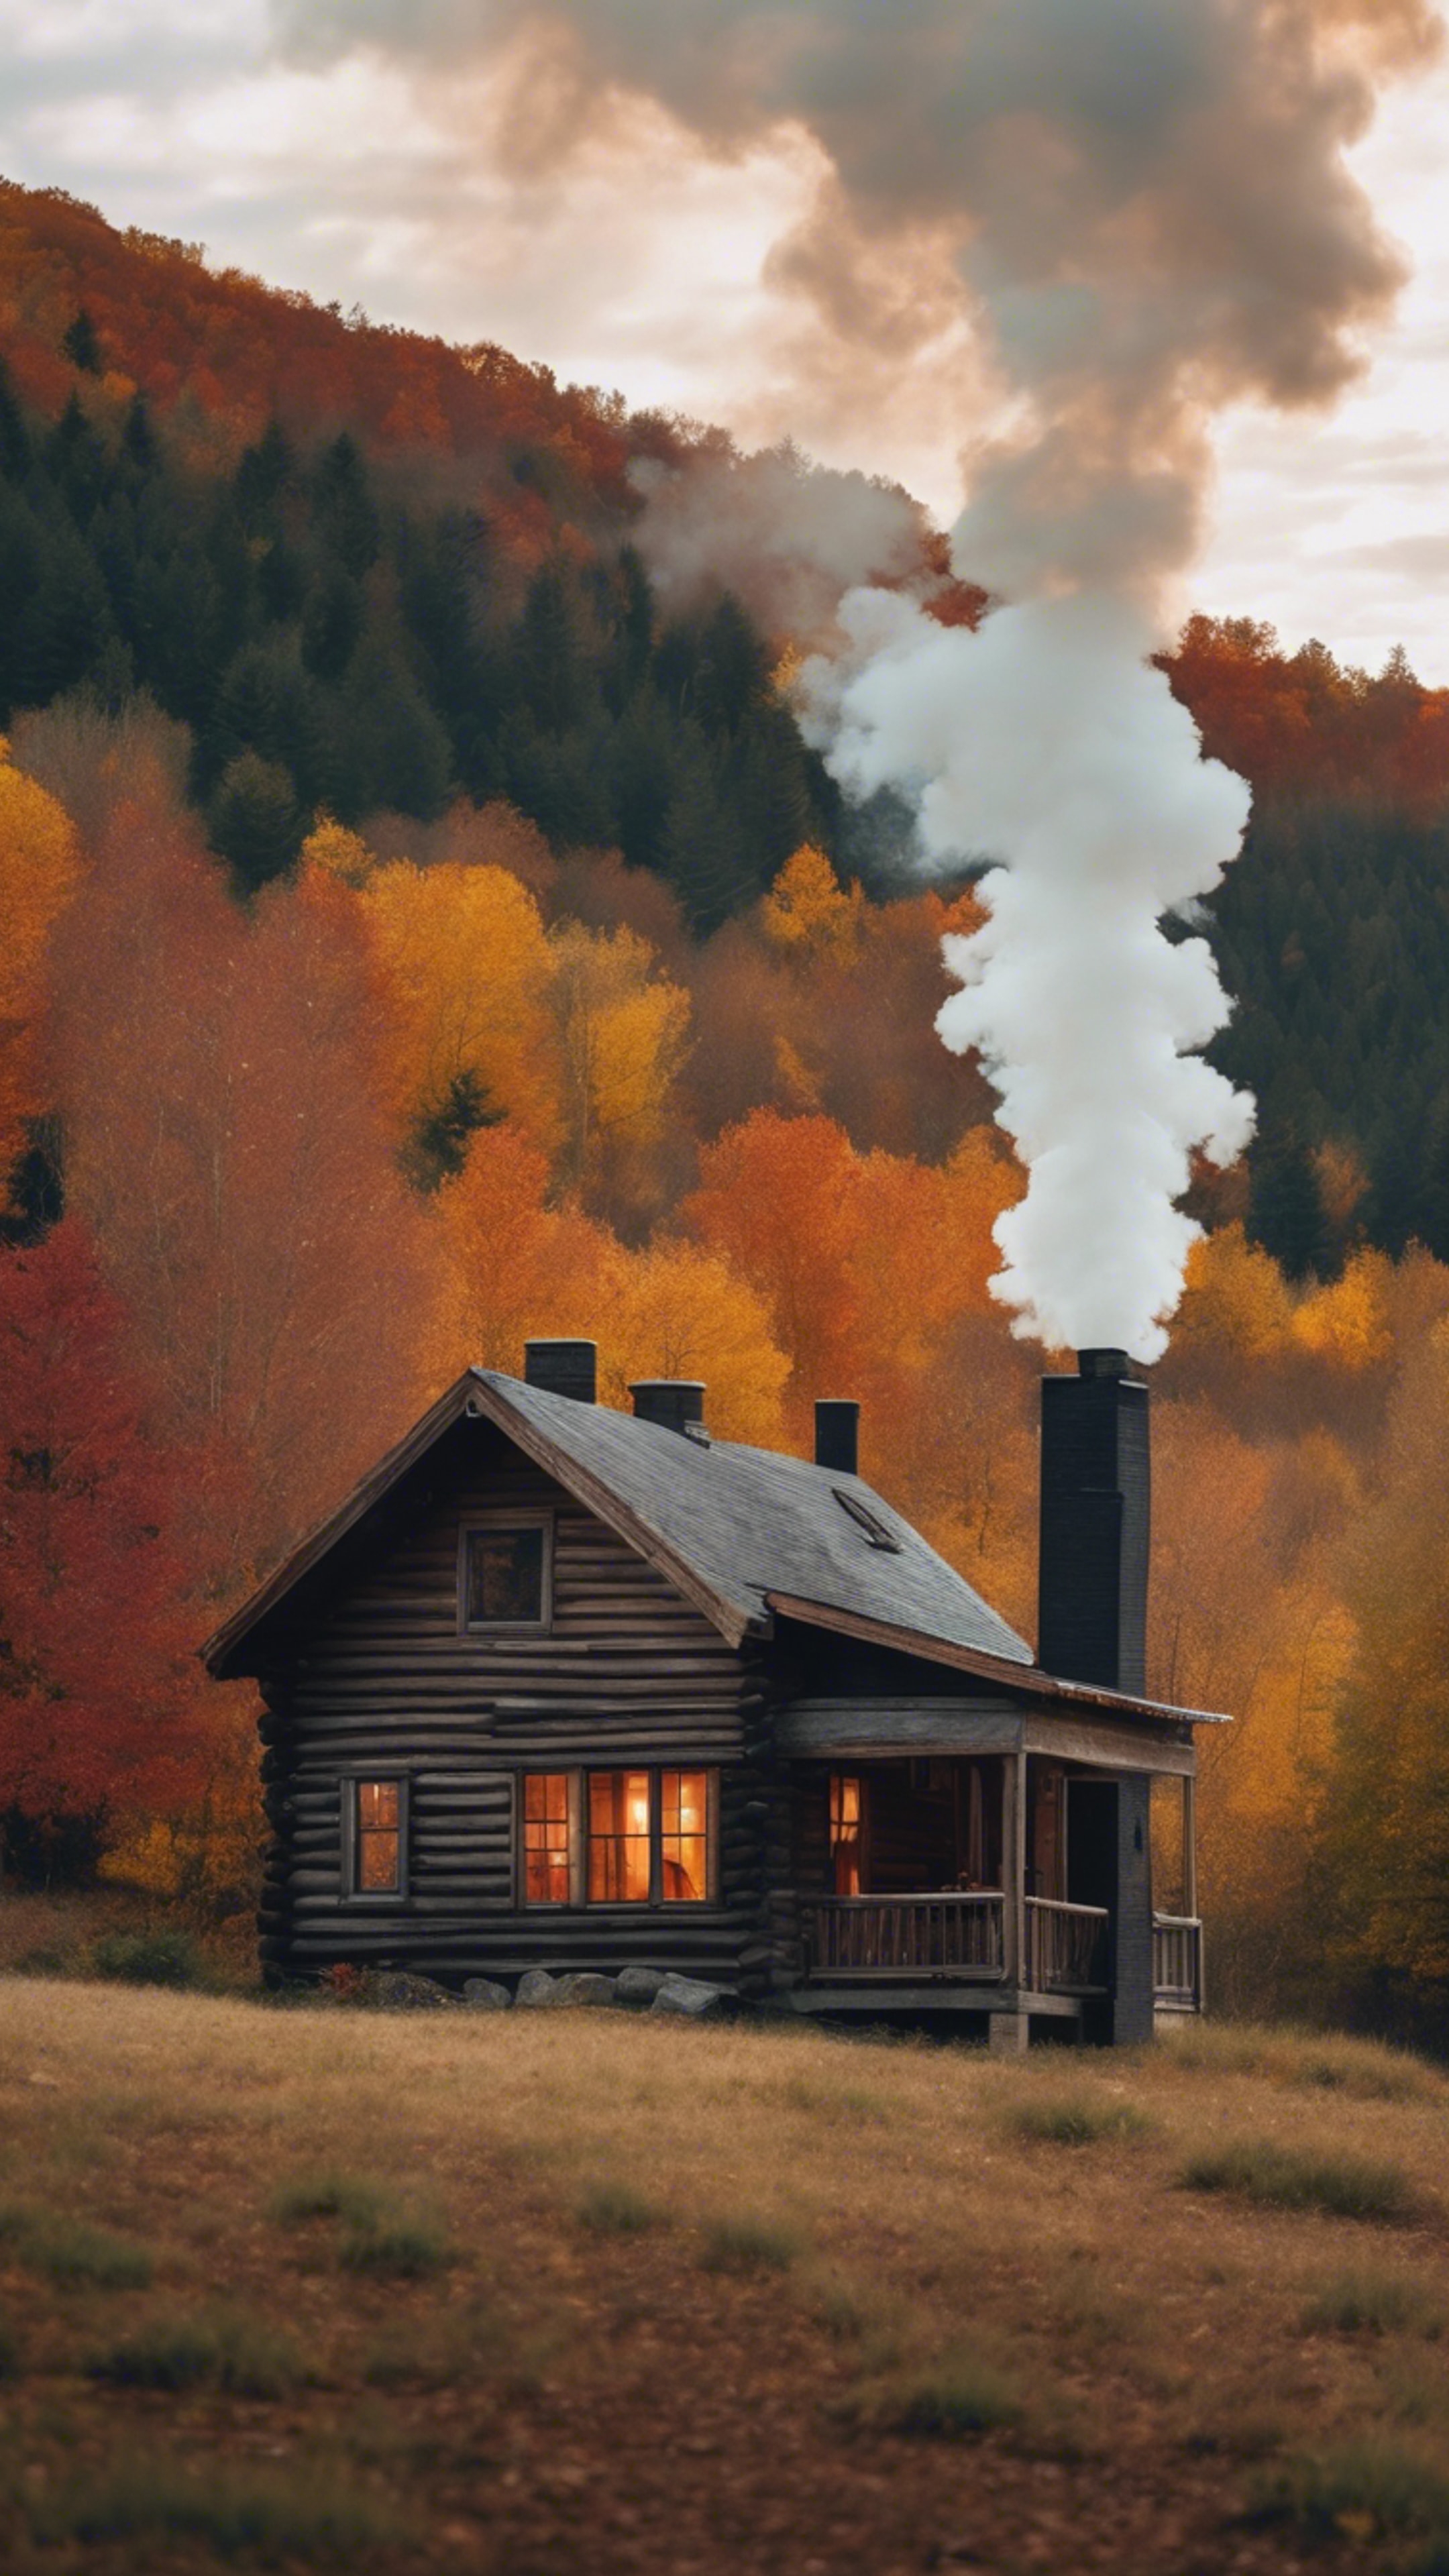 A cozy rustic cabin surrounded by fall foliage, smoke rising gently from its chimney. Wallpaper[61e015739e8841e69879]